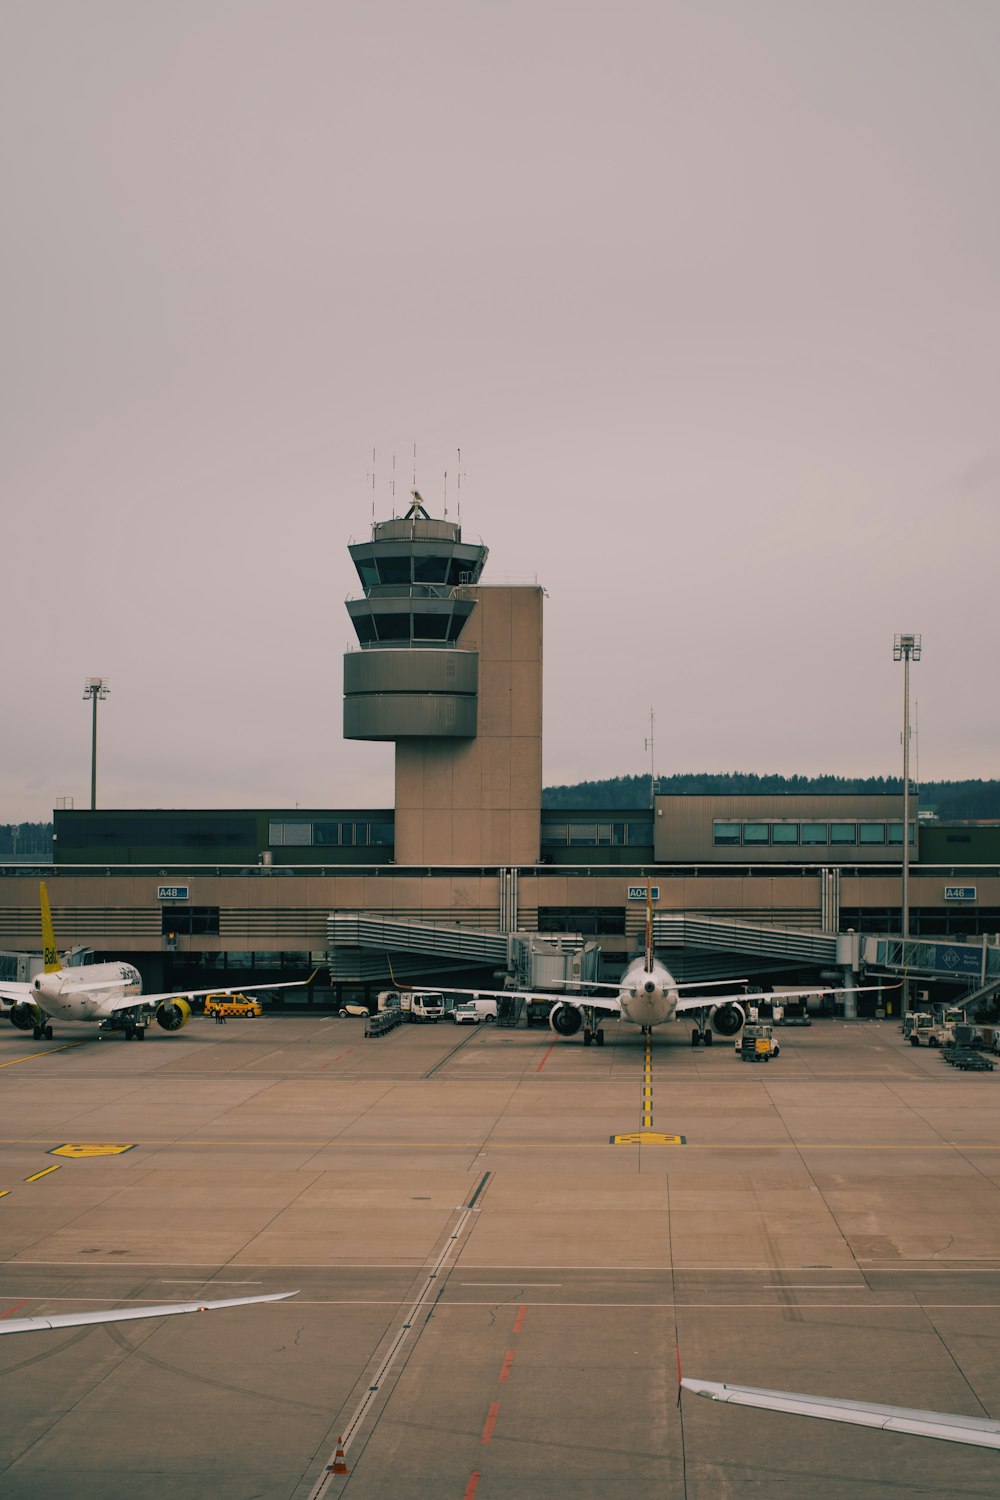 an airport with several planes parked on the tarmac